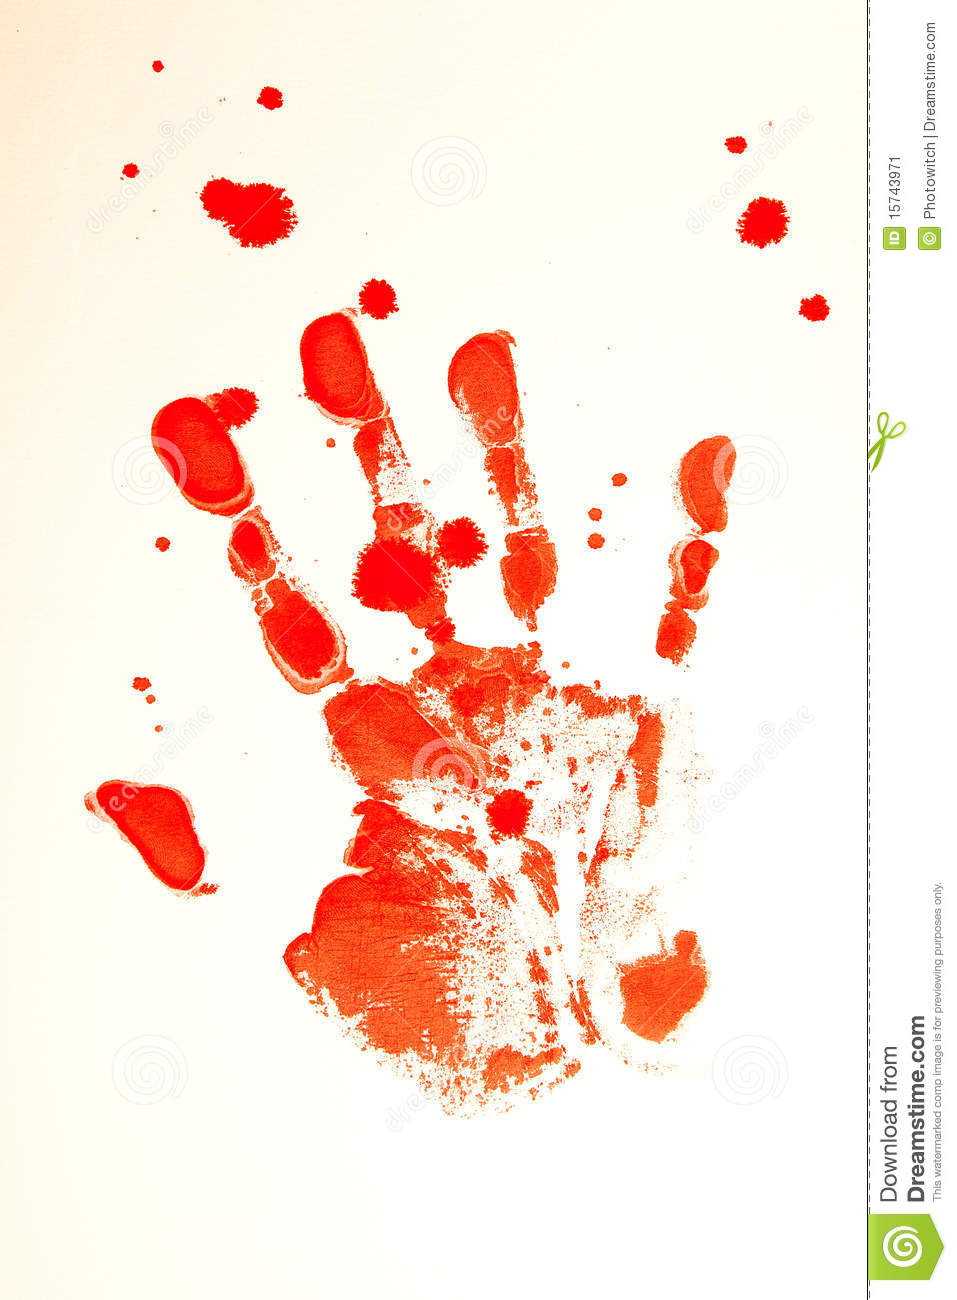 Bloody Print Of A Bleeding Hand On A White Background